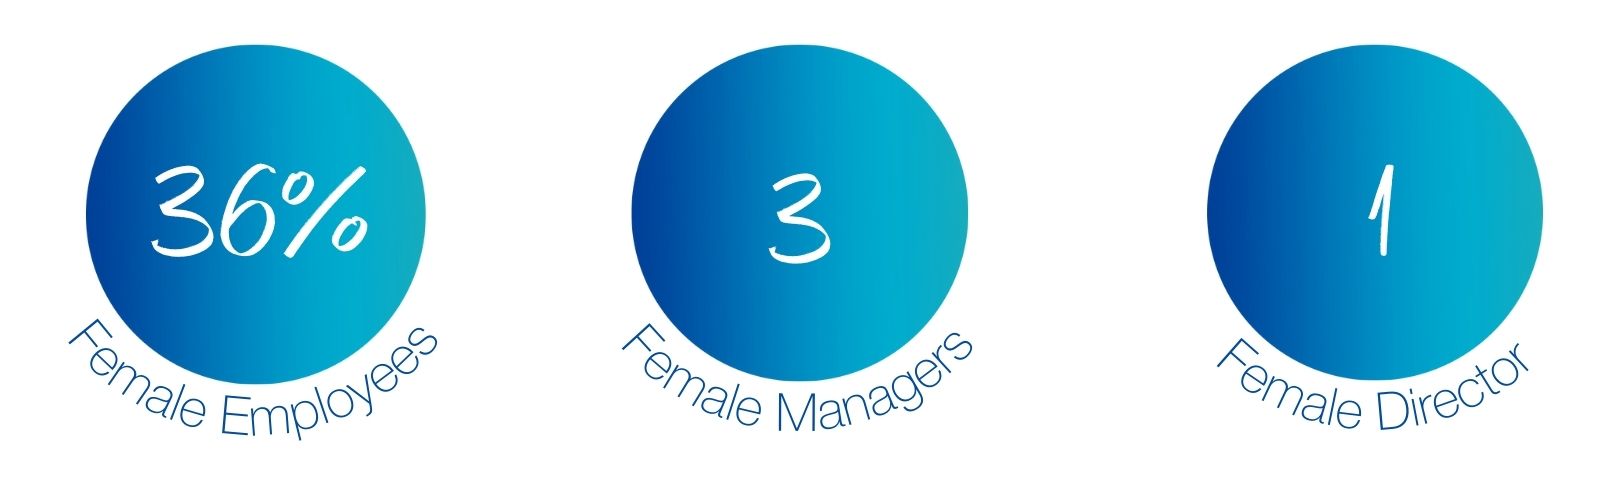 graphic reading 36% female employees, 3 female managers and 1 female director in blue circles